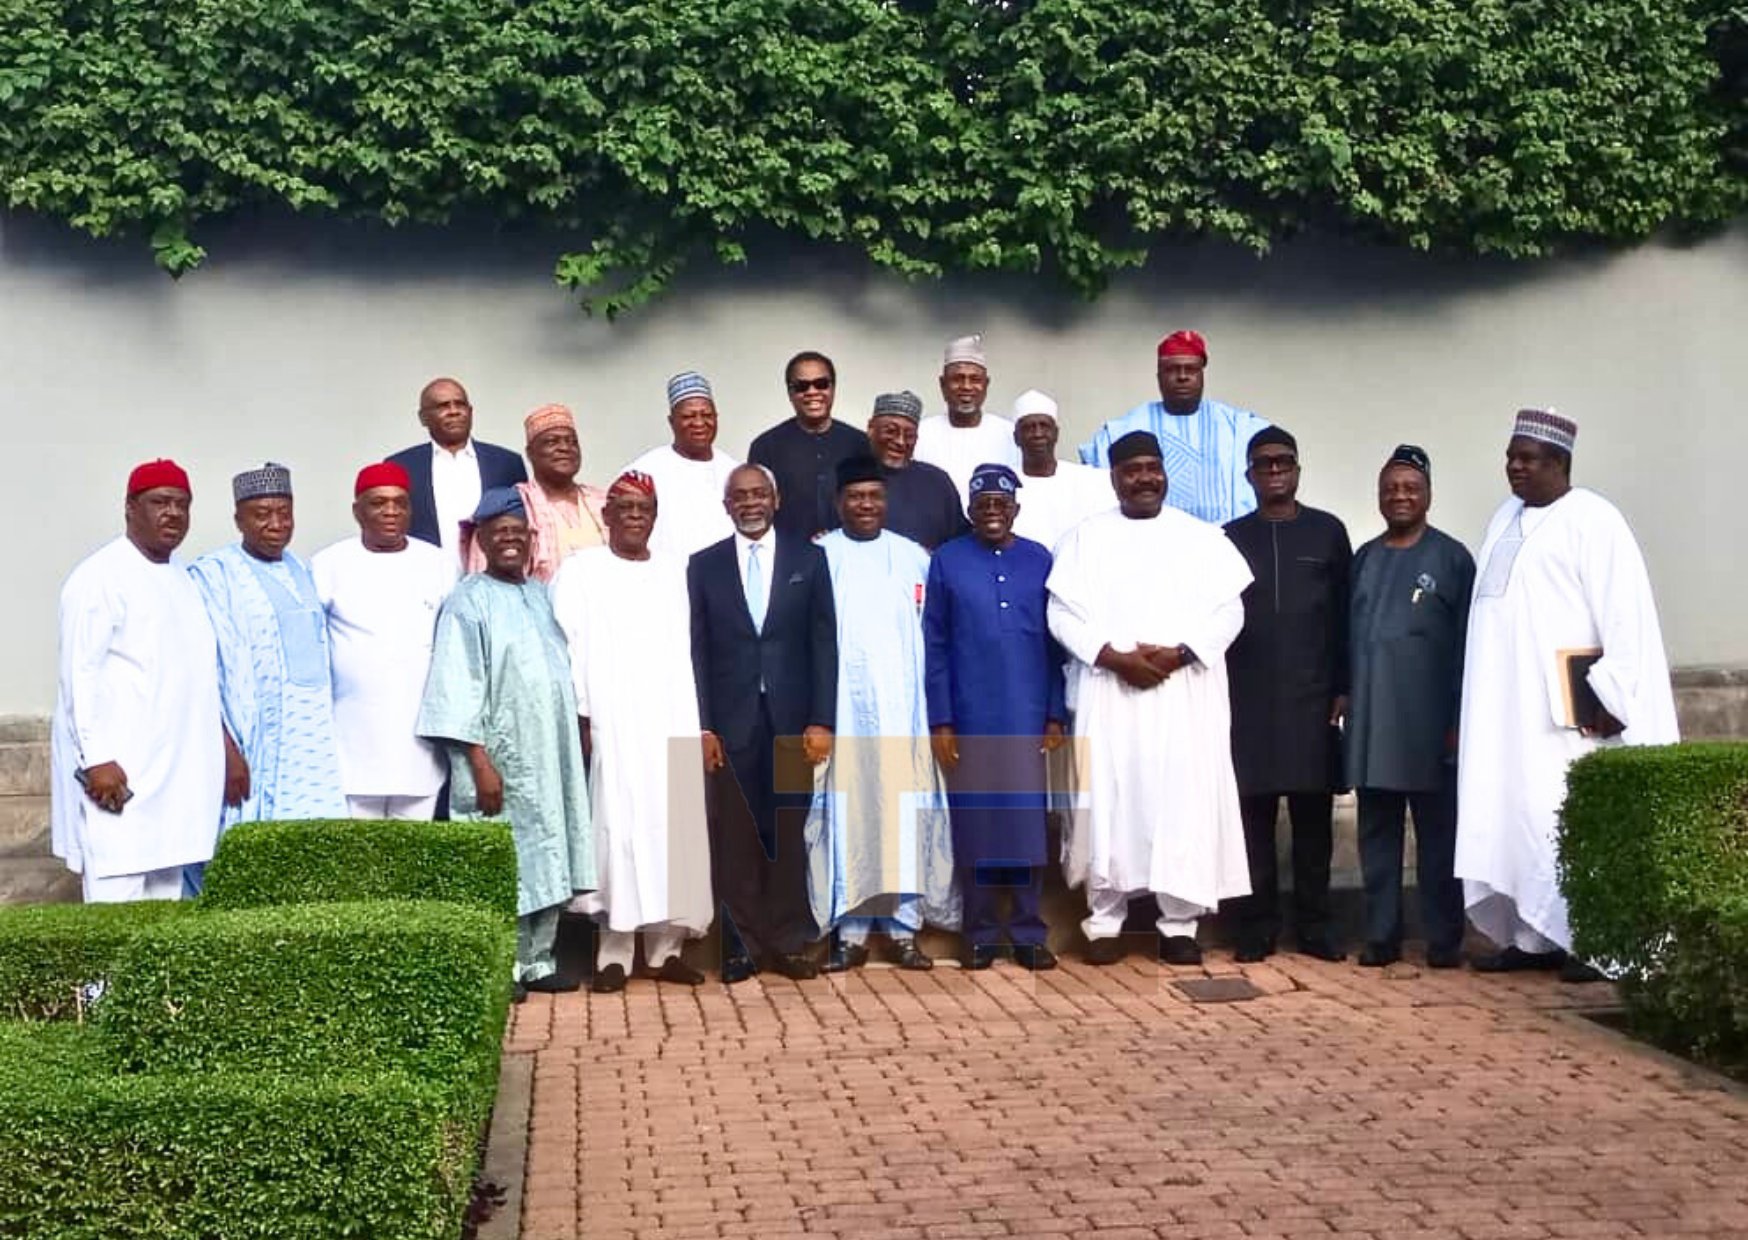 The 12 former governors present